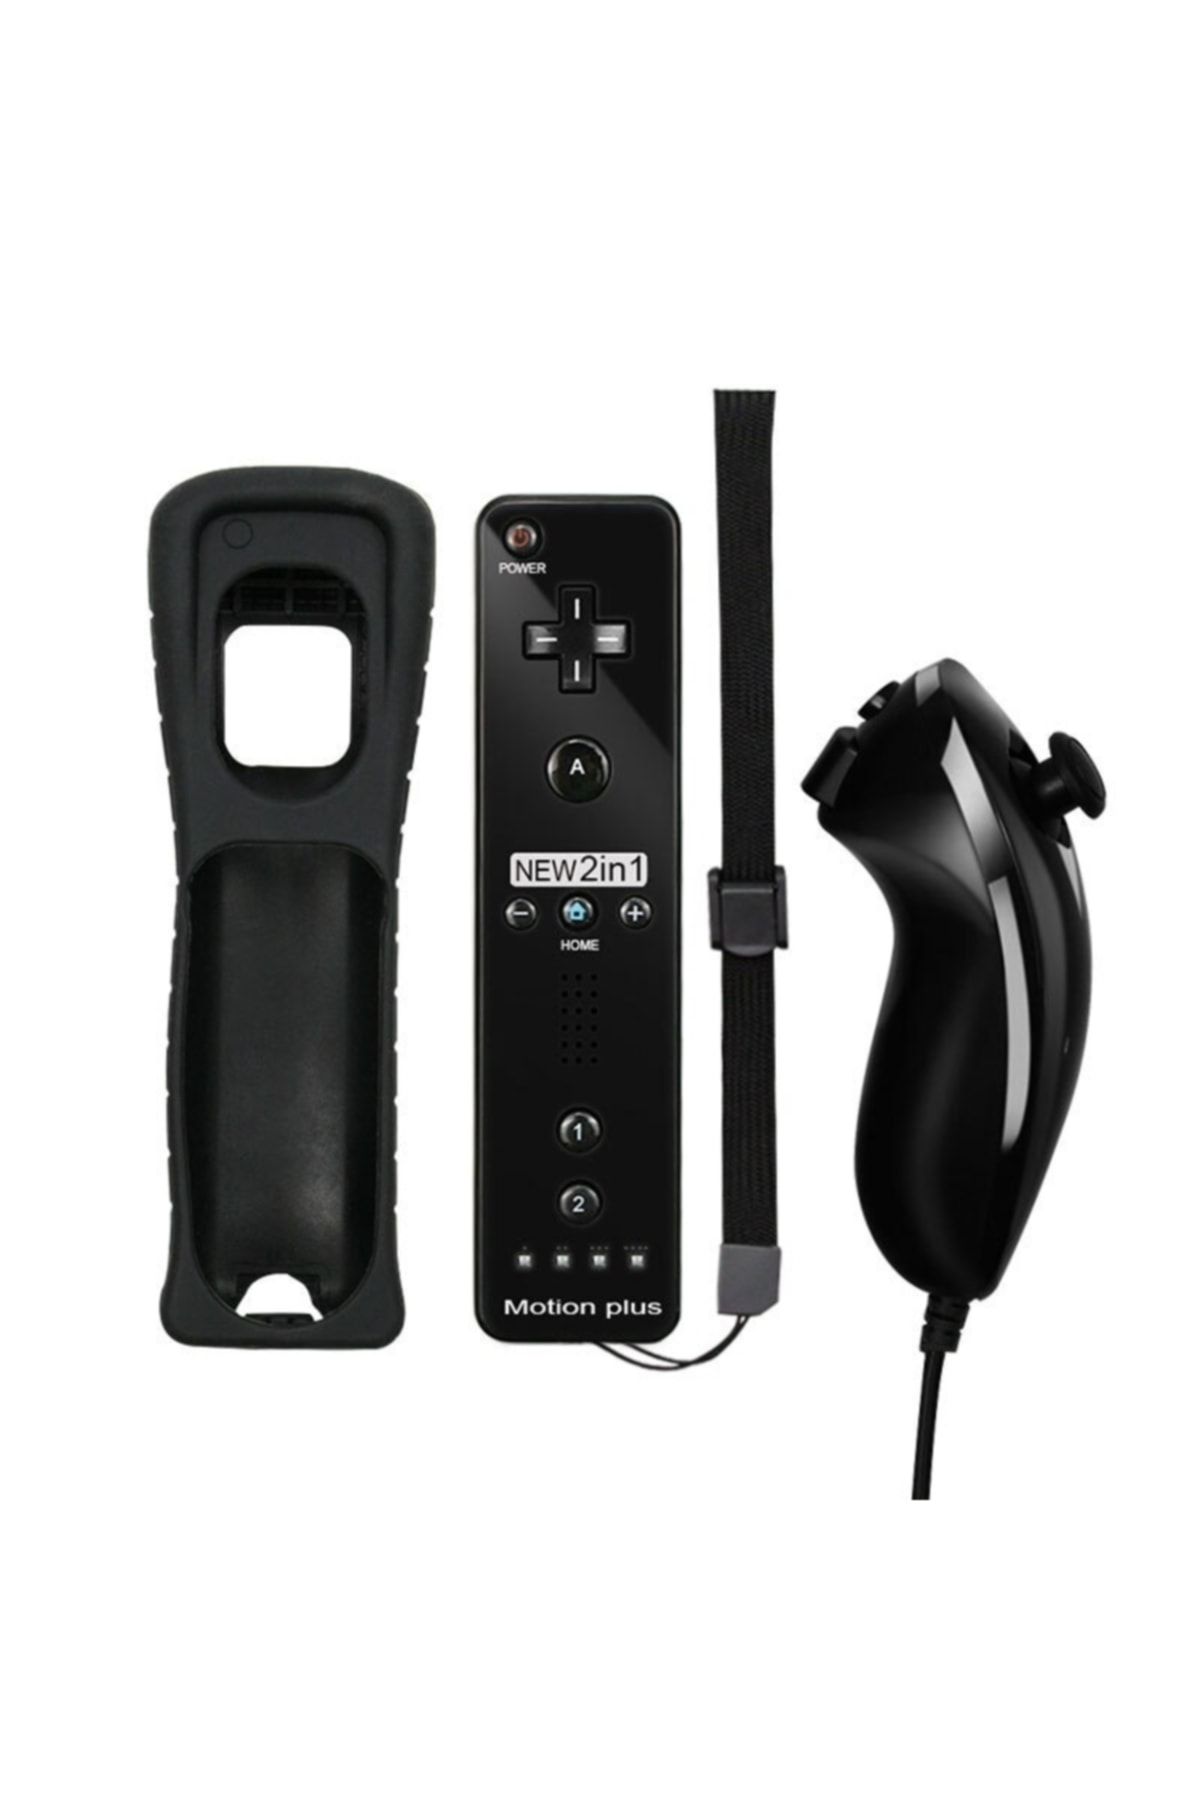 STARX Wii 2 In 1 Remote Nunchuk Controller Motion Plus